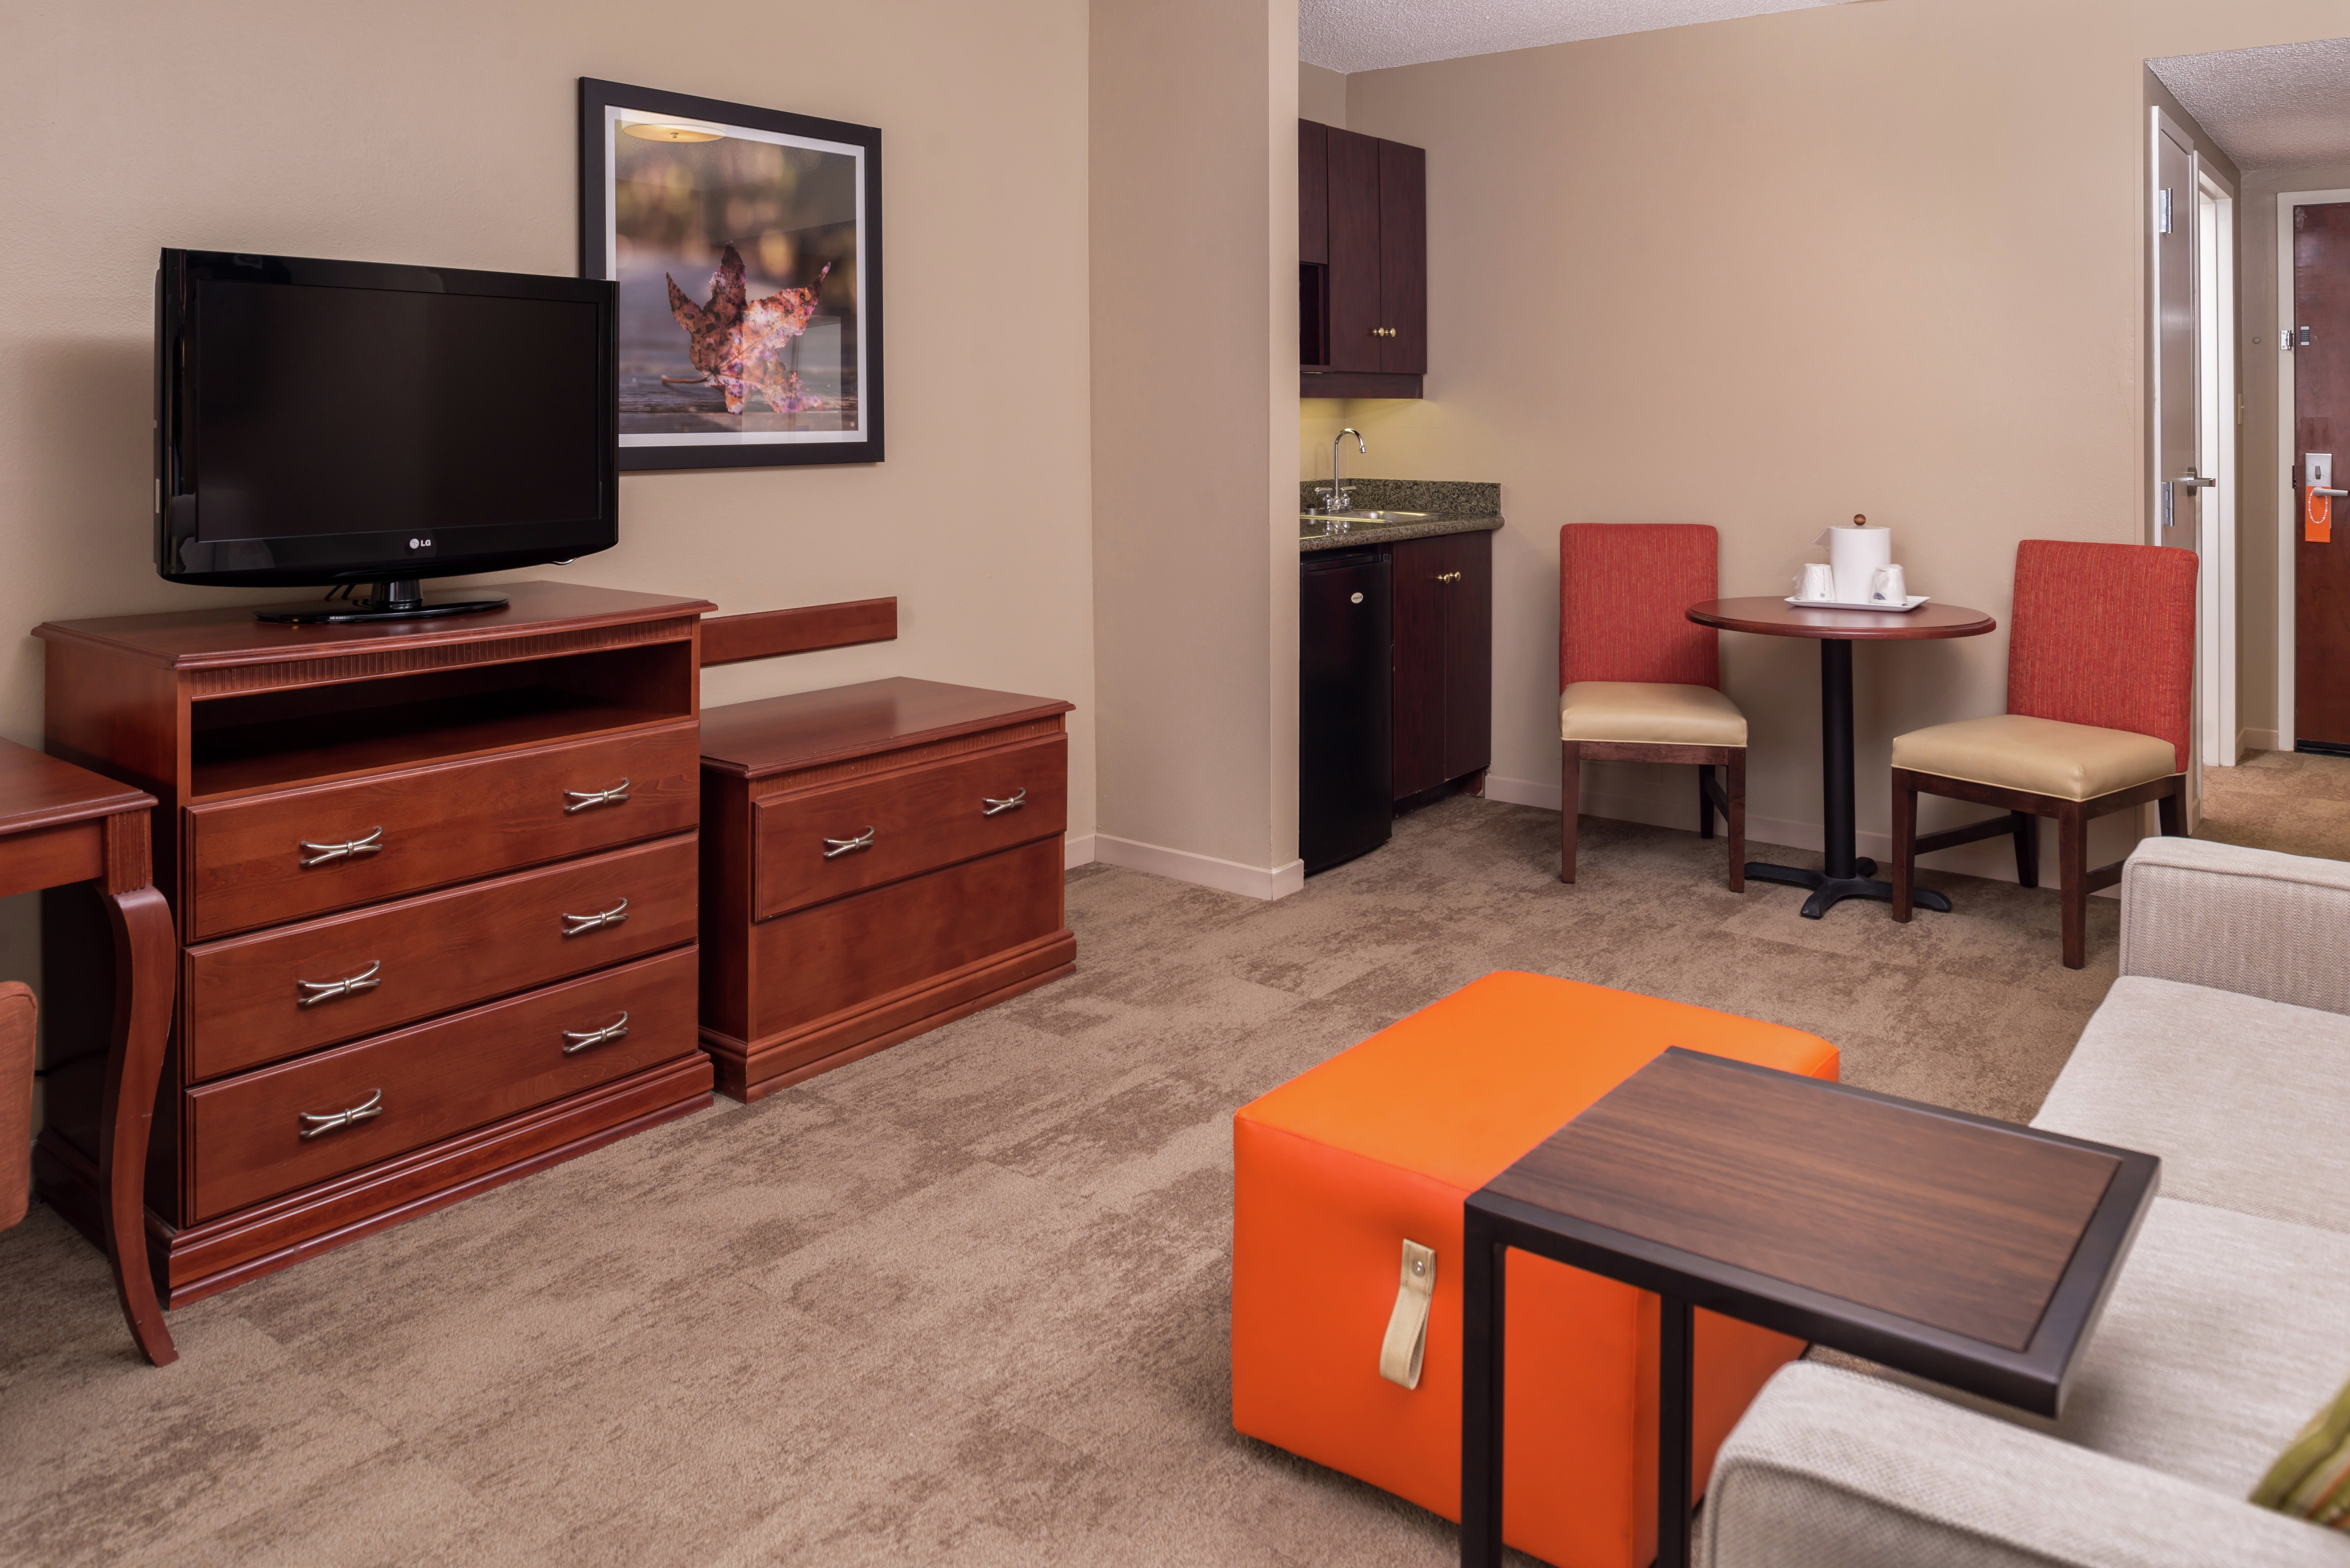 Sofa Bed, Orange Ottoman, TV, Wet Bar, Seating for Two at Dining Table, and Entry in Deluxe Living Room